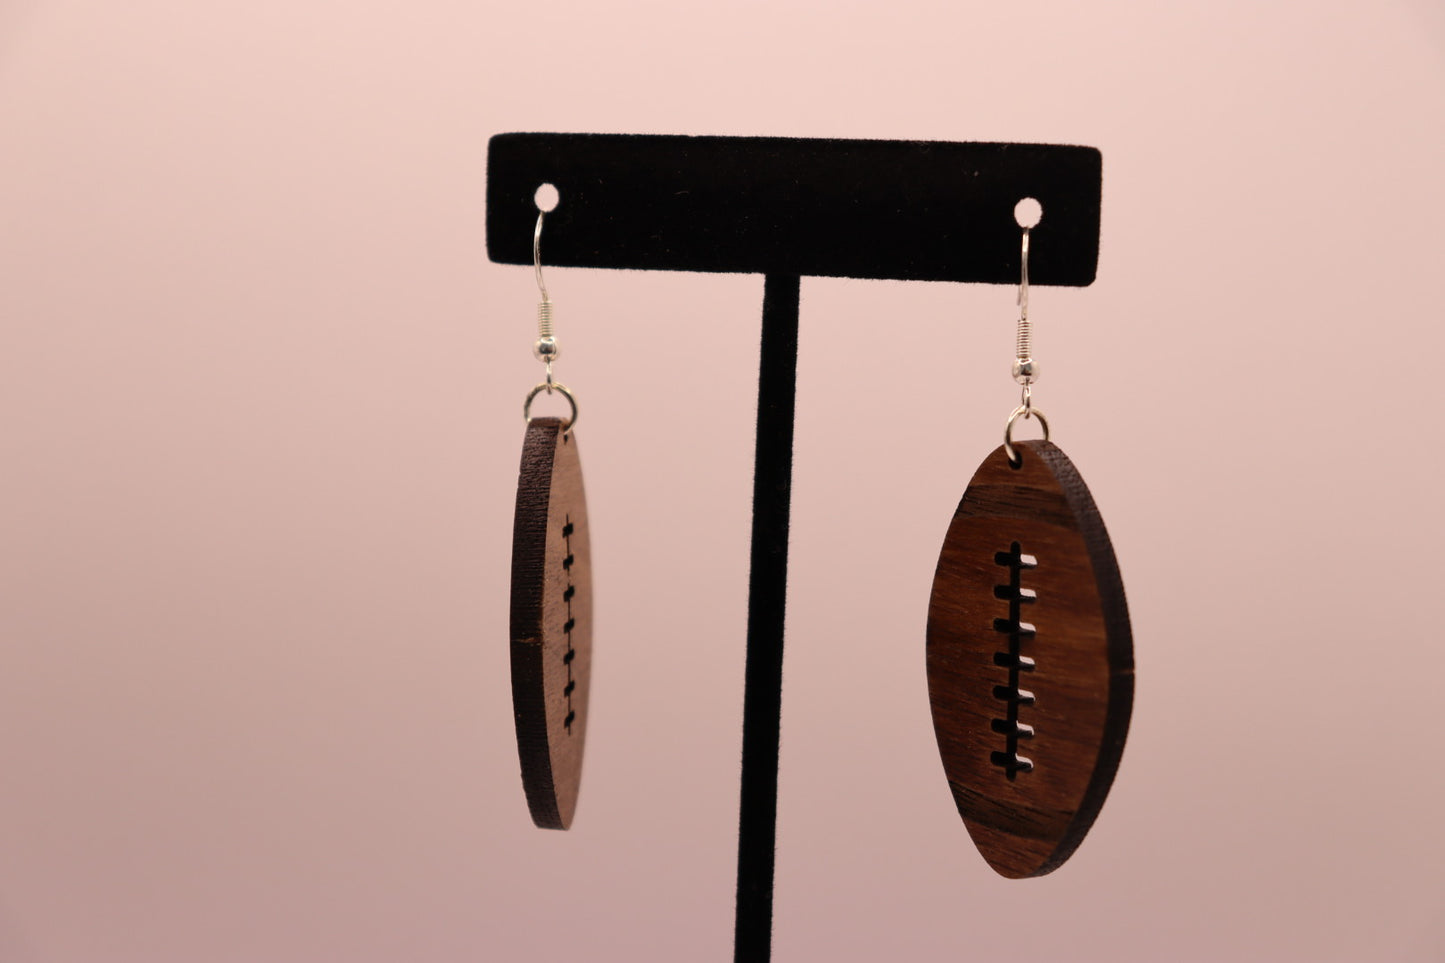 The Football - Natural Wood Oval Earrings